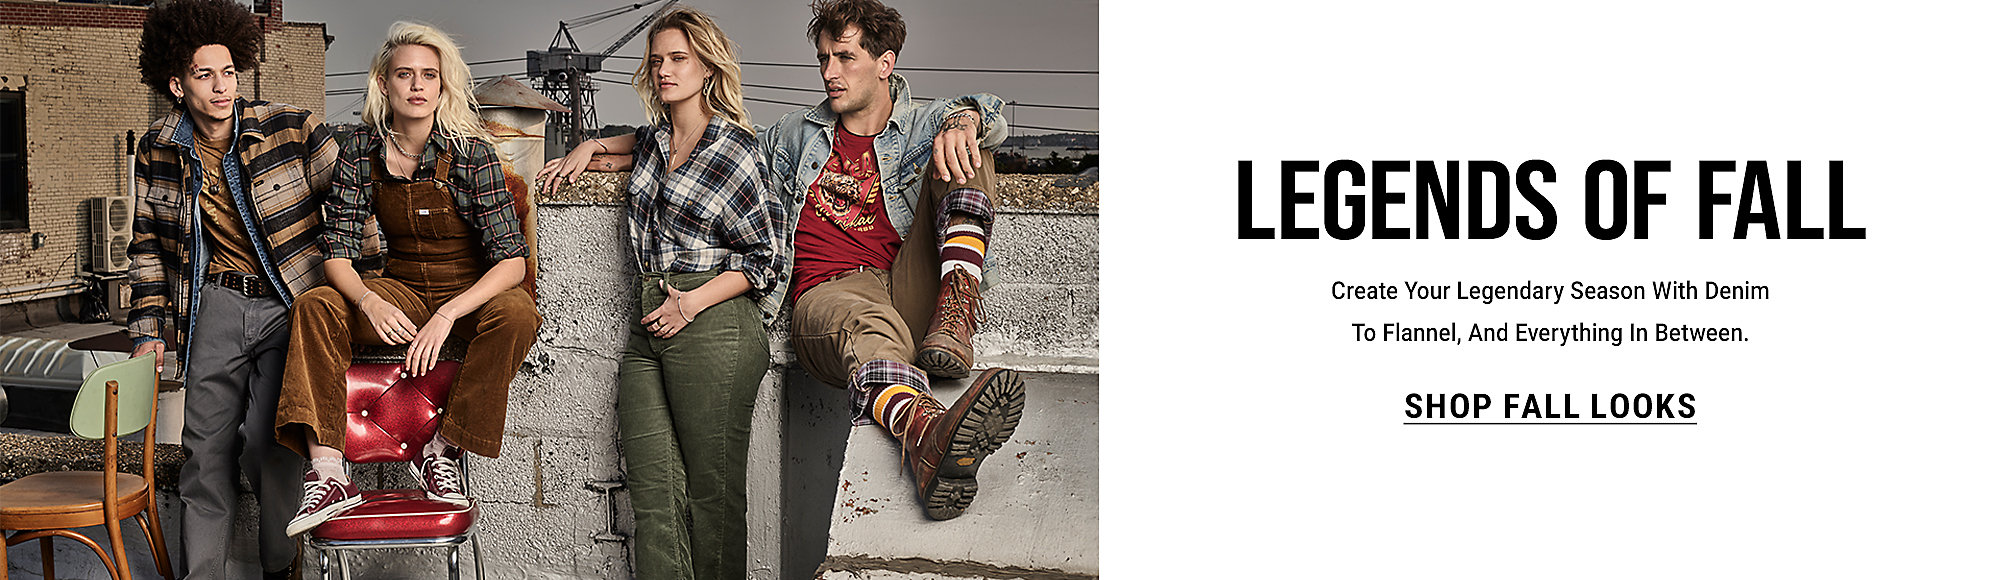 Legends of Fall: Create your legendary season with denim to flannel, and everything in between.